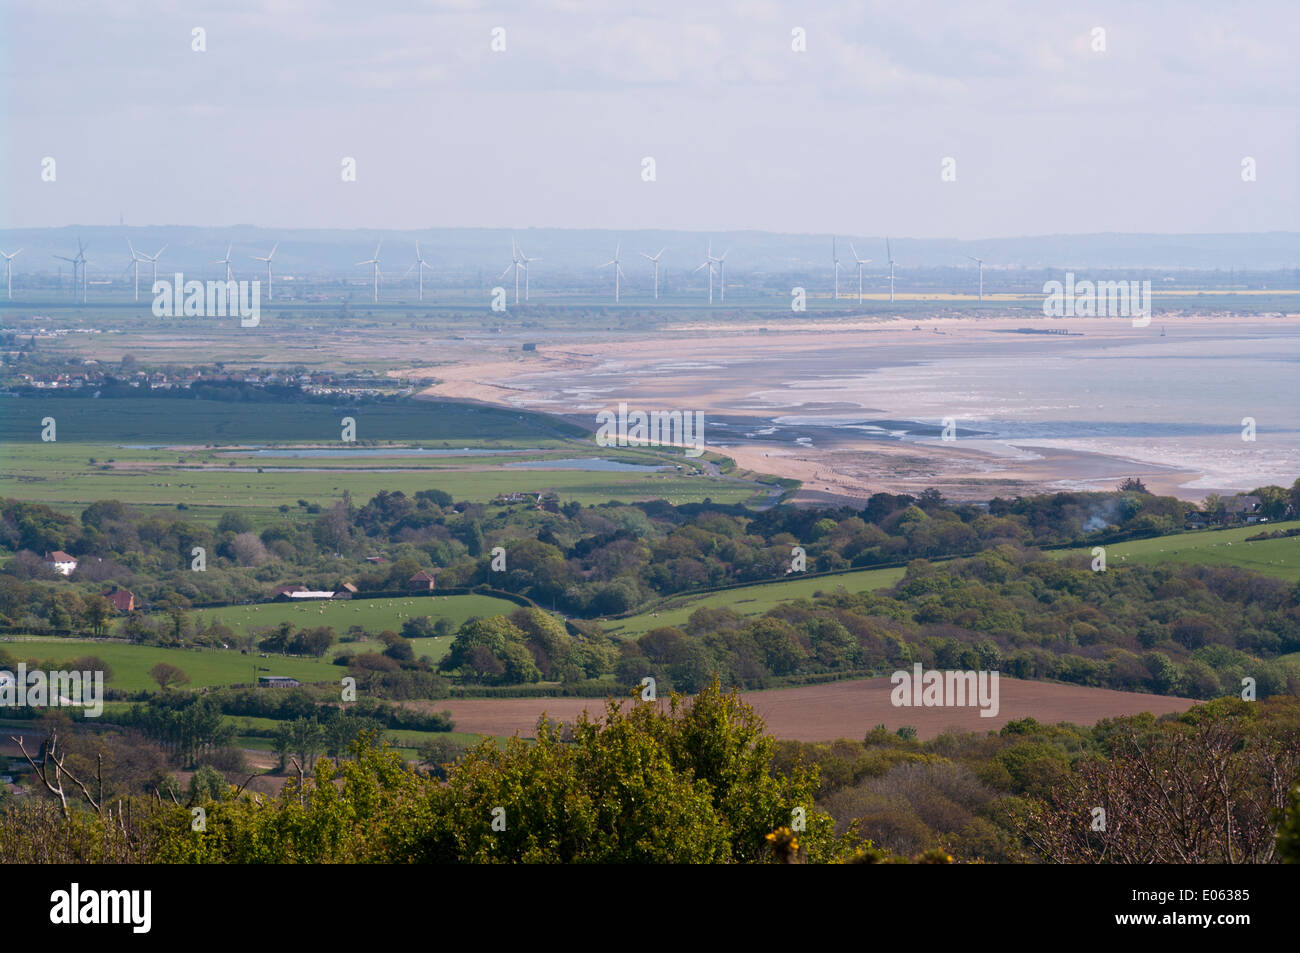 A View Through The Summer Haze Of Rye Bay East Sussex UK Stock Photo